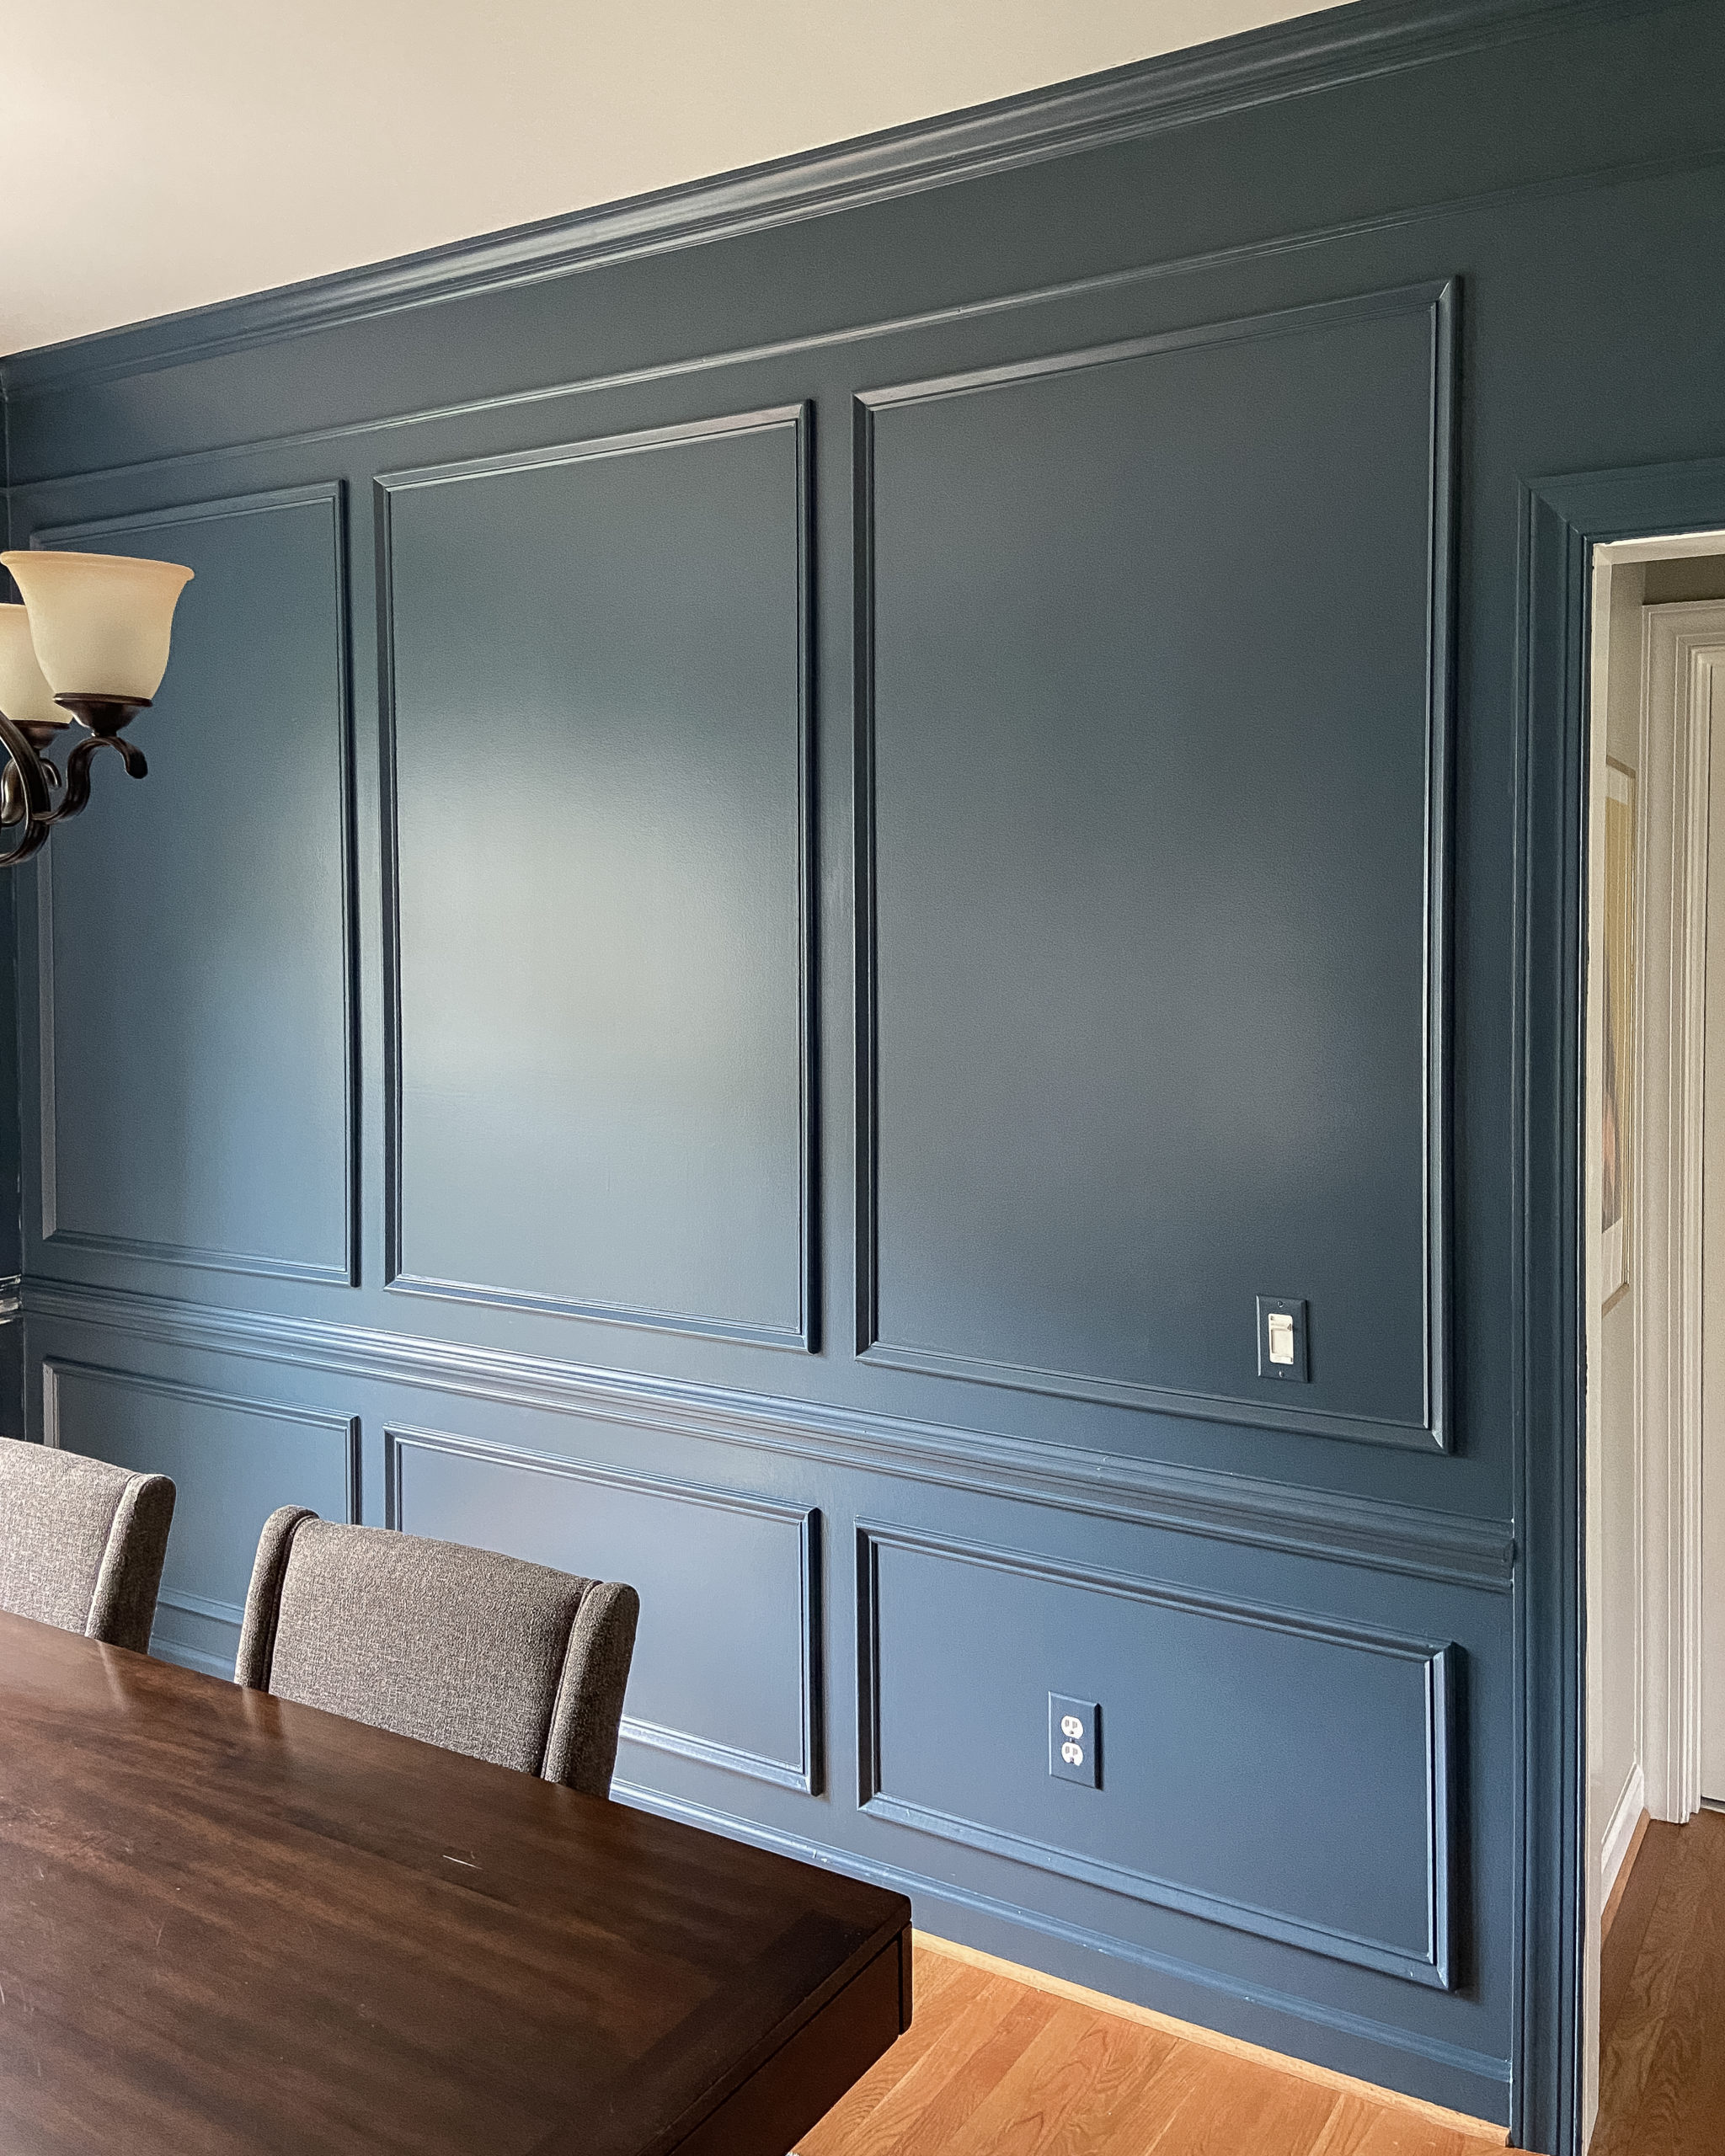 Transitional Picture Frame Molding in a Dining Room in a deep teal blue paint.